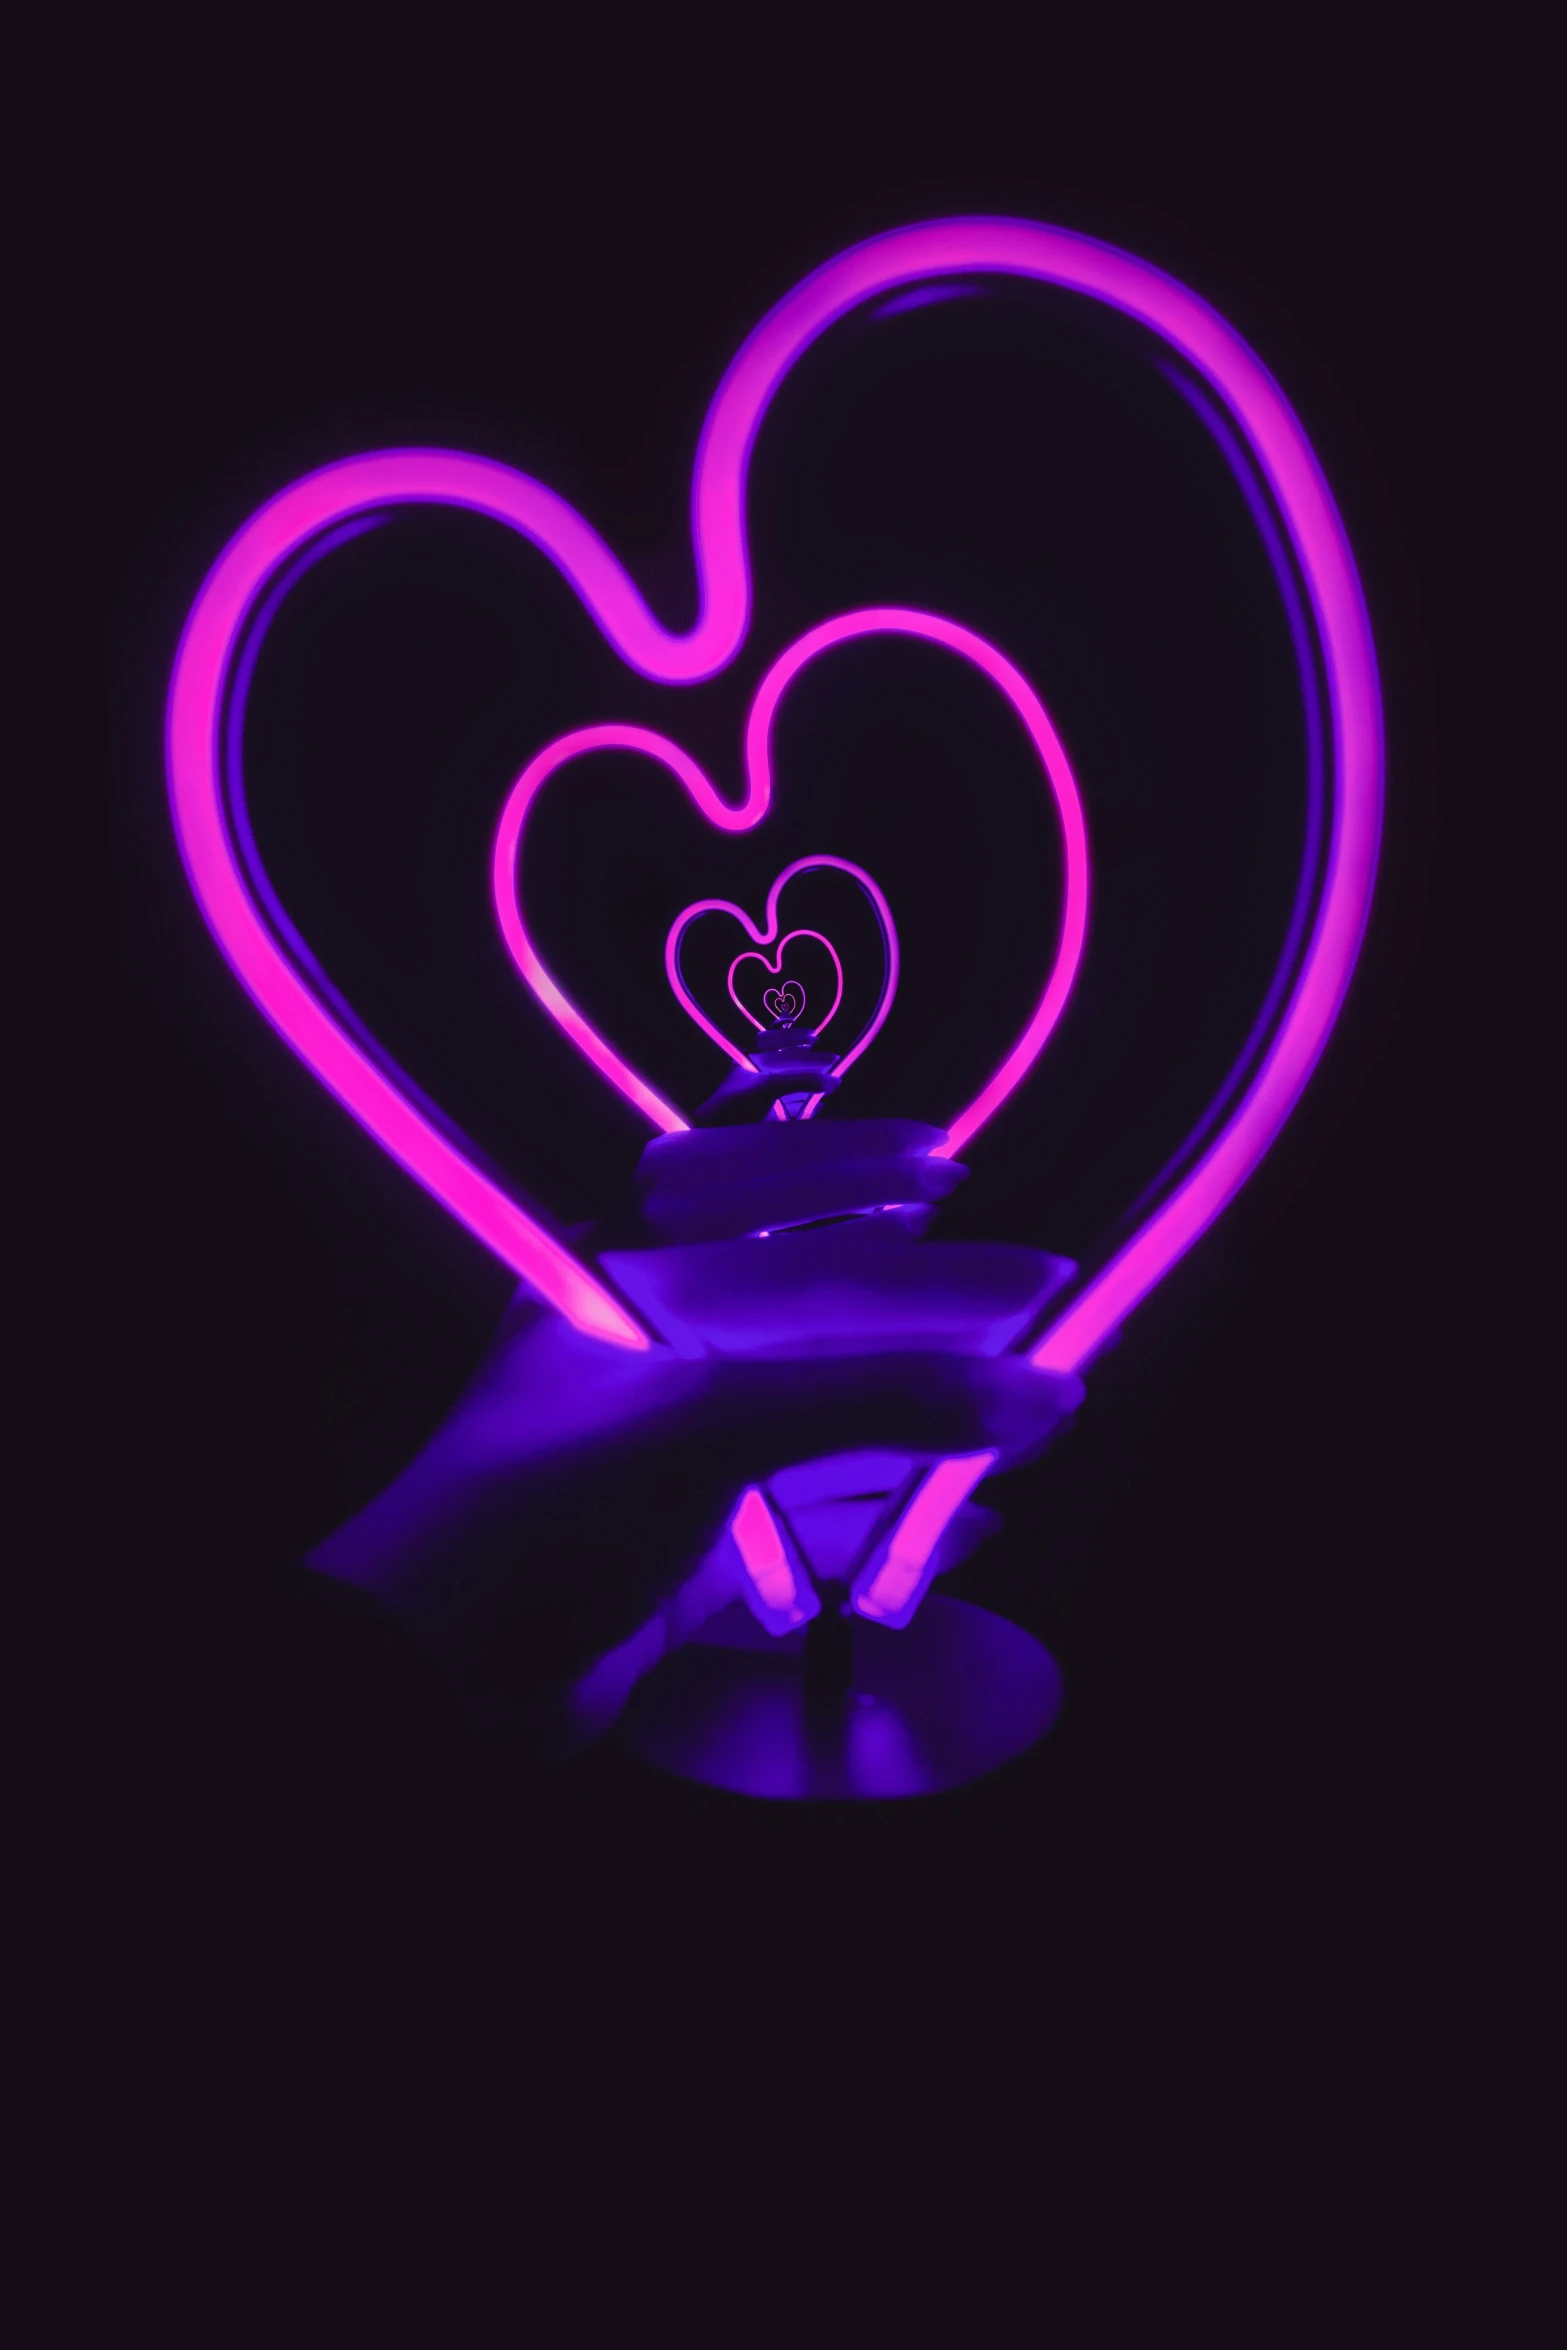 neon hearts are lit up to look like they are in the air